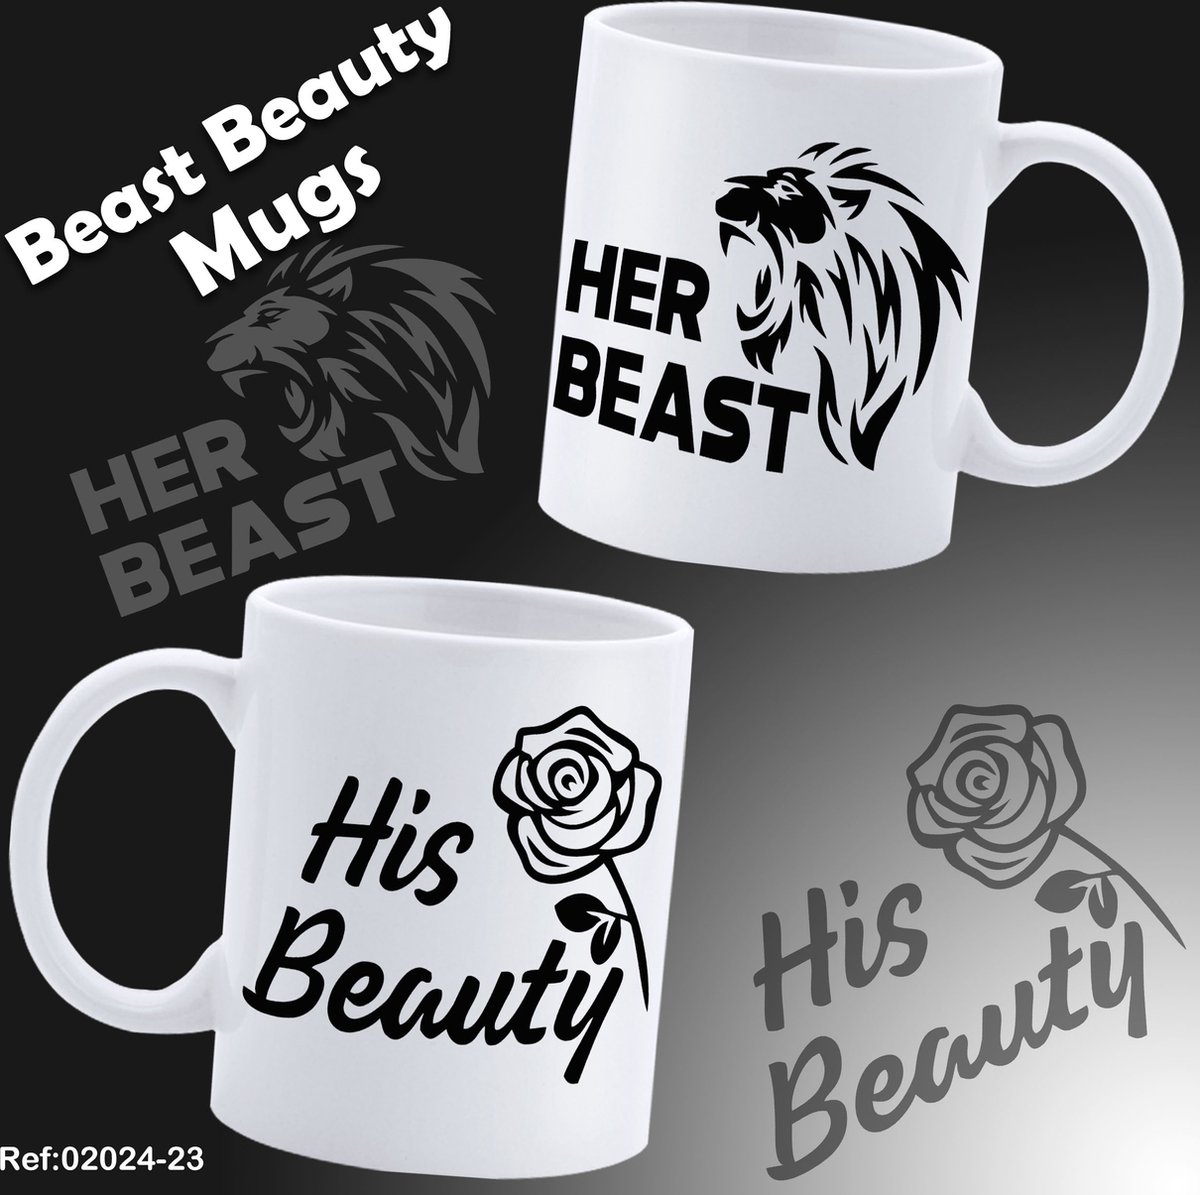 Her Beast and His Beauty Couple Matching mug - Mug with text - Funny mug - Anniversary gift - Gift for husband - Gift for wife - Gift for her - Gift for him - Funny gift - Tea glasses - Valentine gifts - Coffee cups